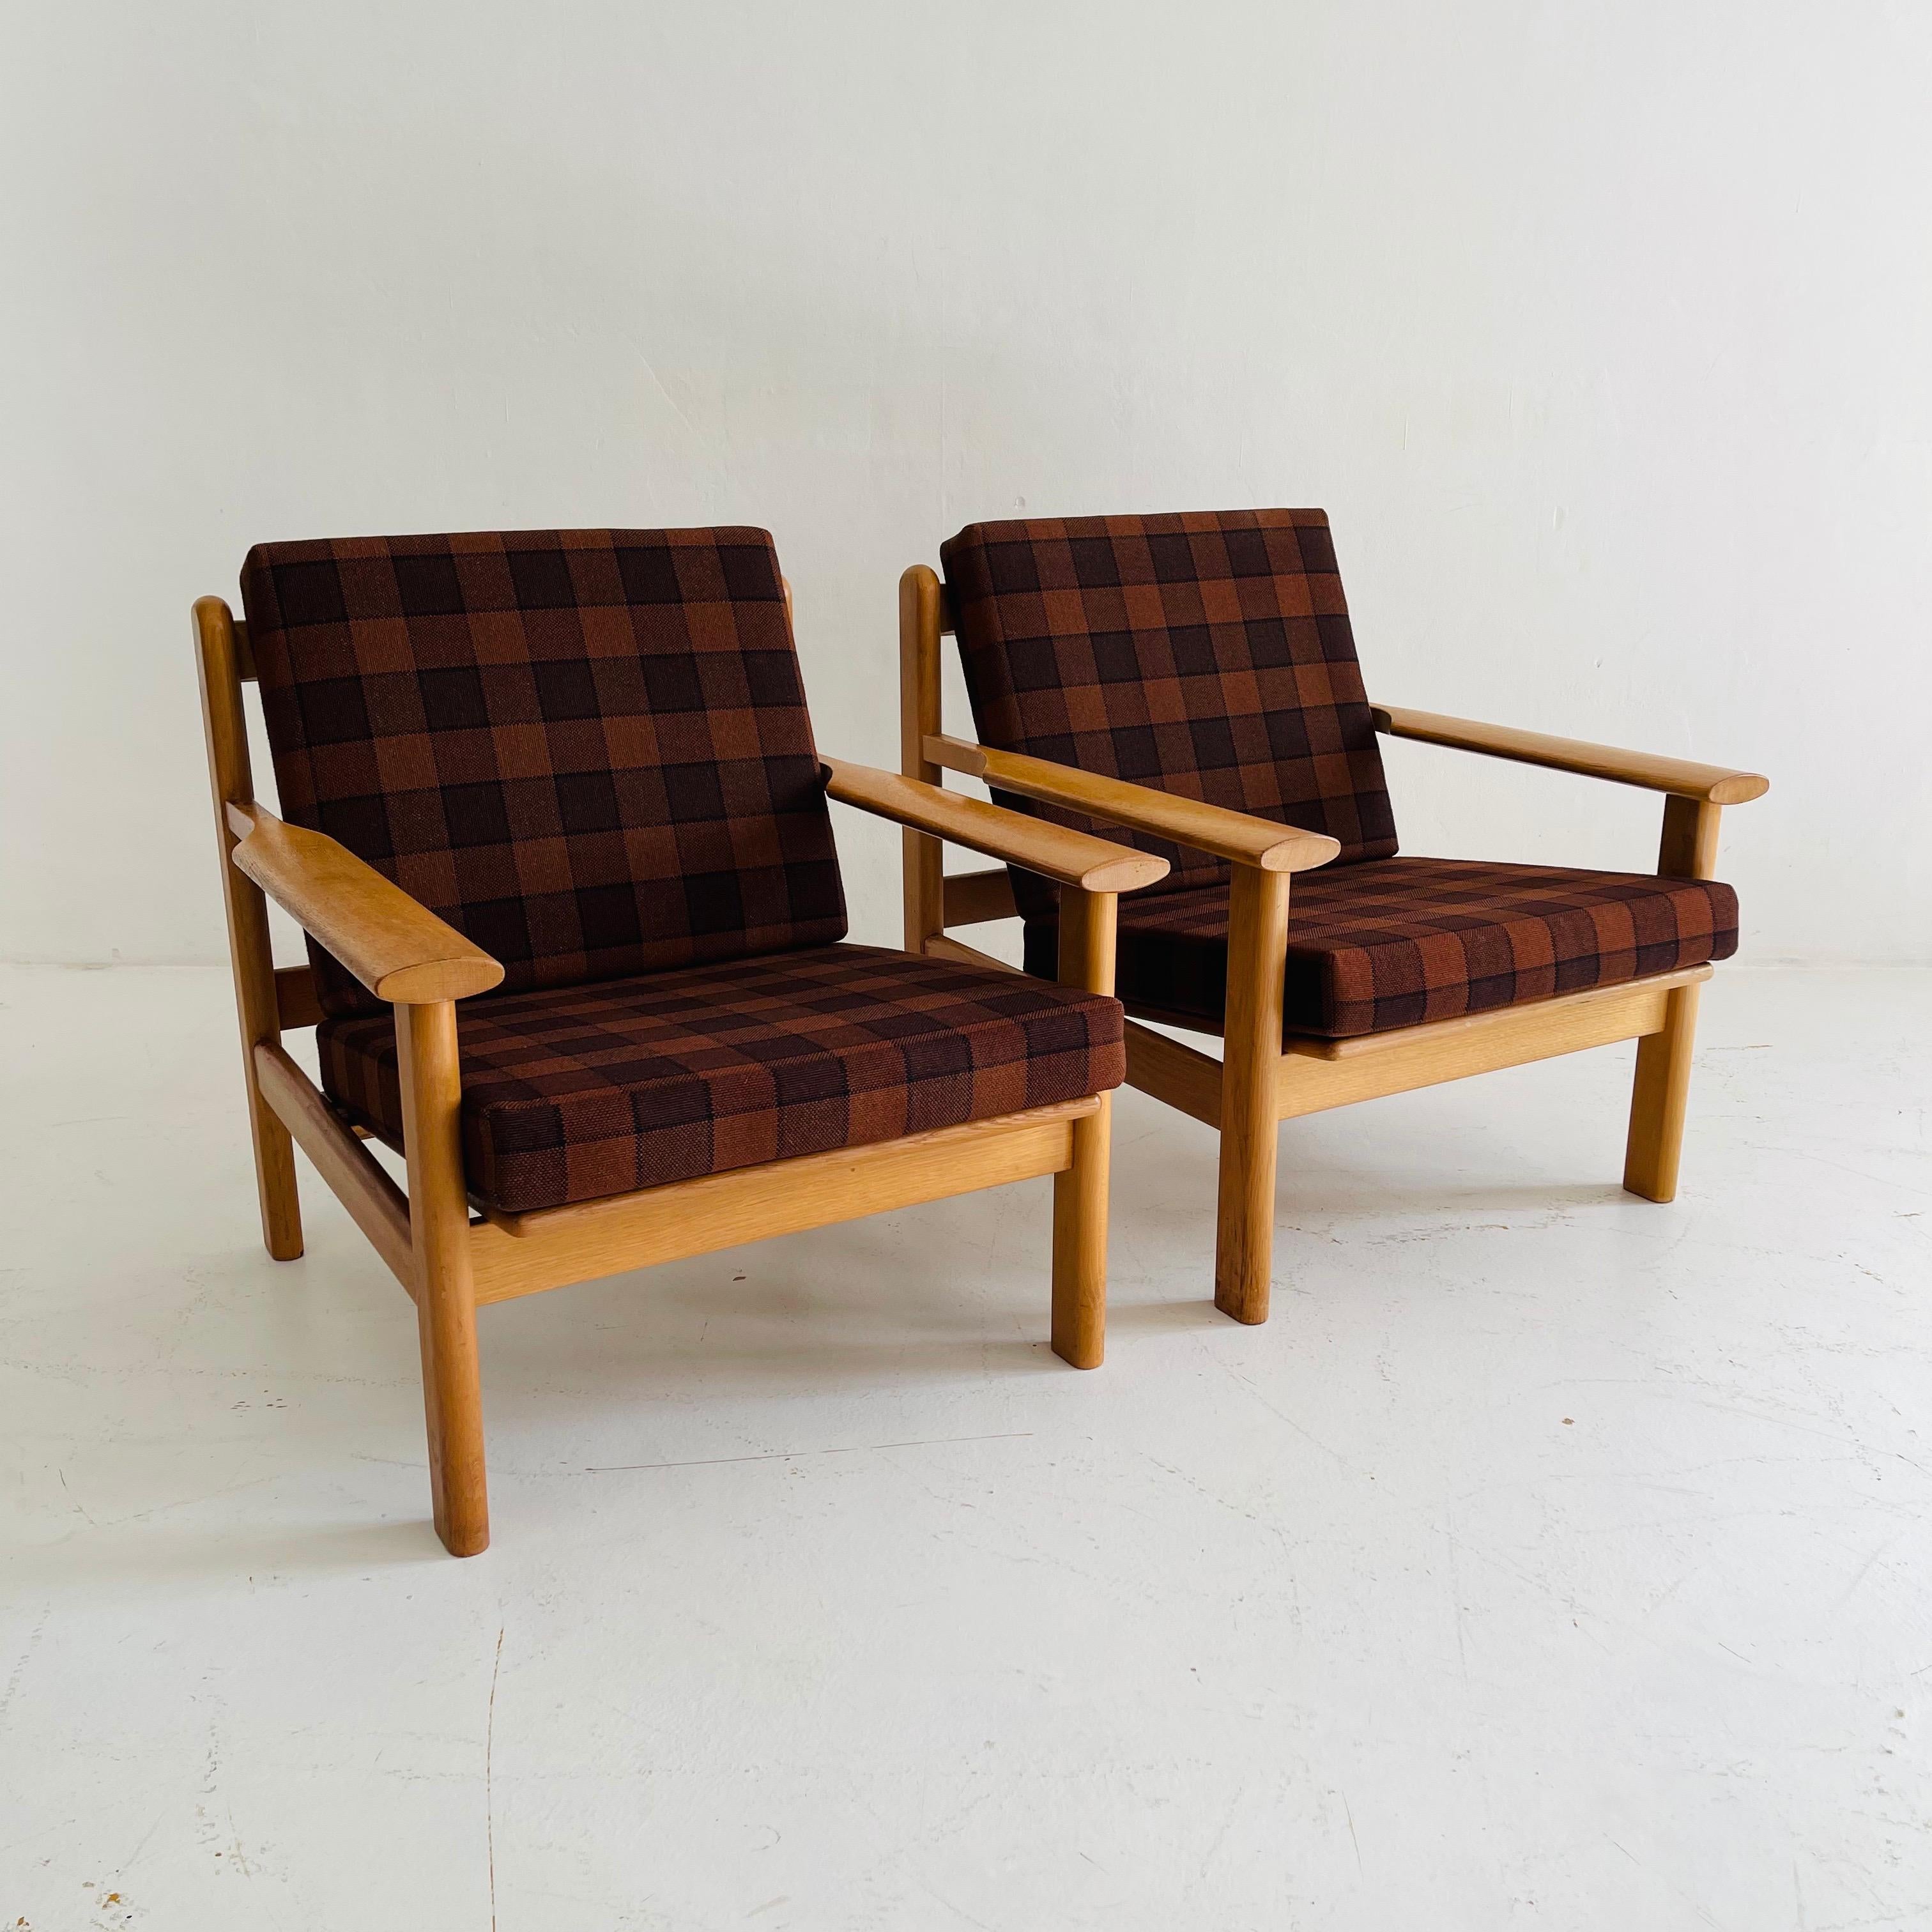 Living Room Suite Sofa Lounge Chair by Poul Volther for Frem Rølje, Denmark 1950 For Sale 2